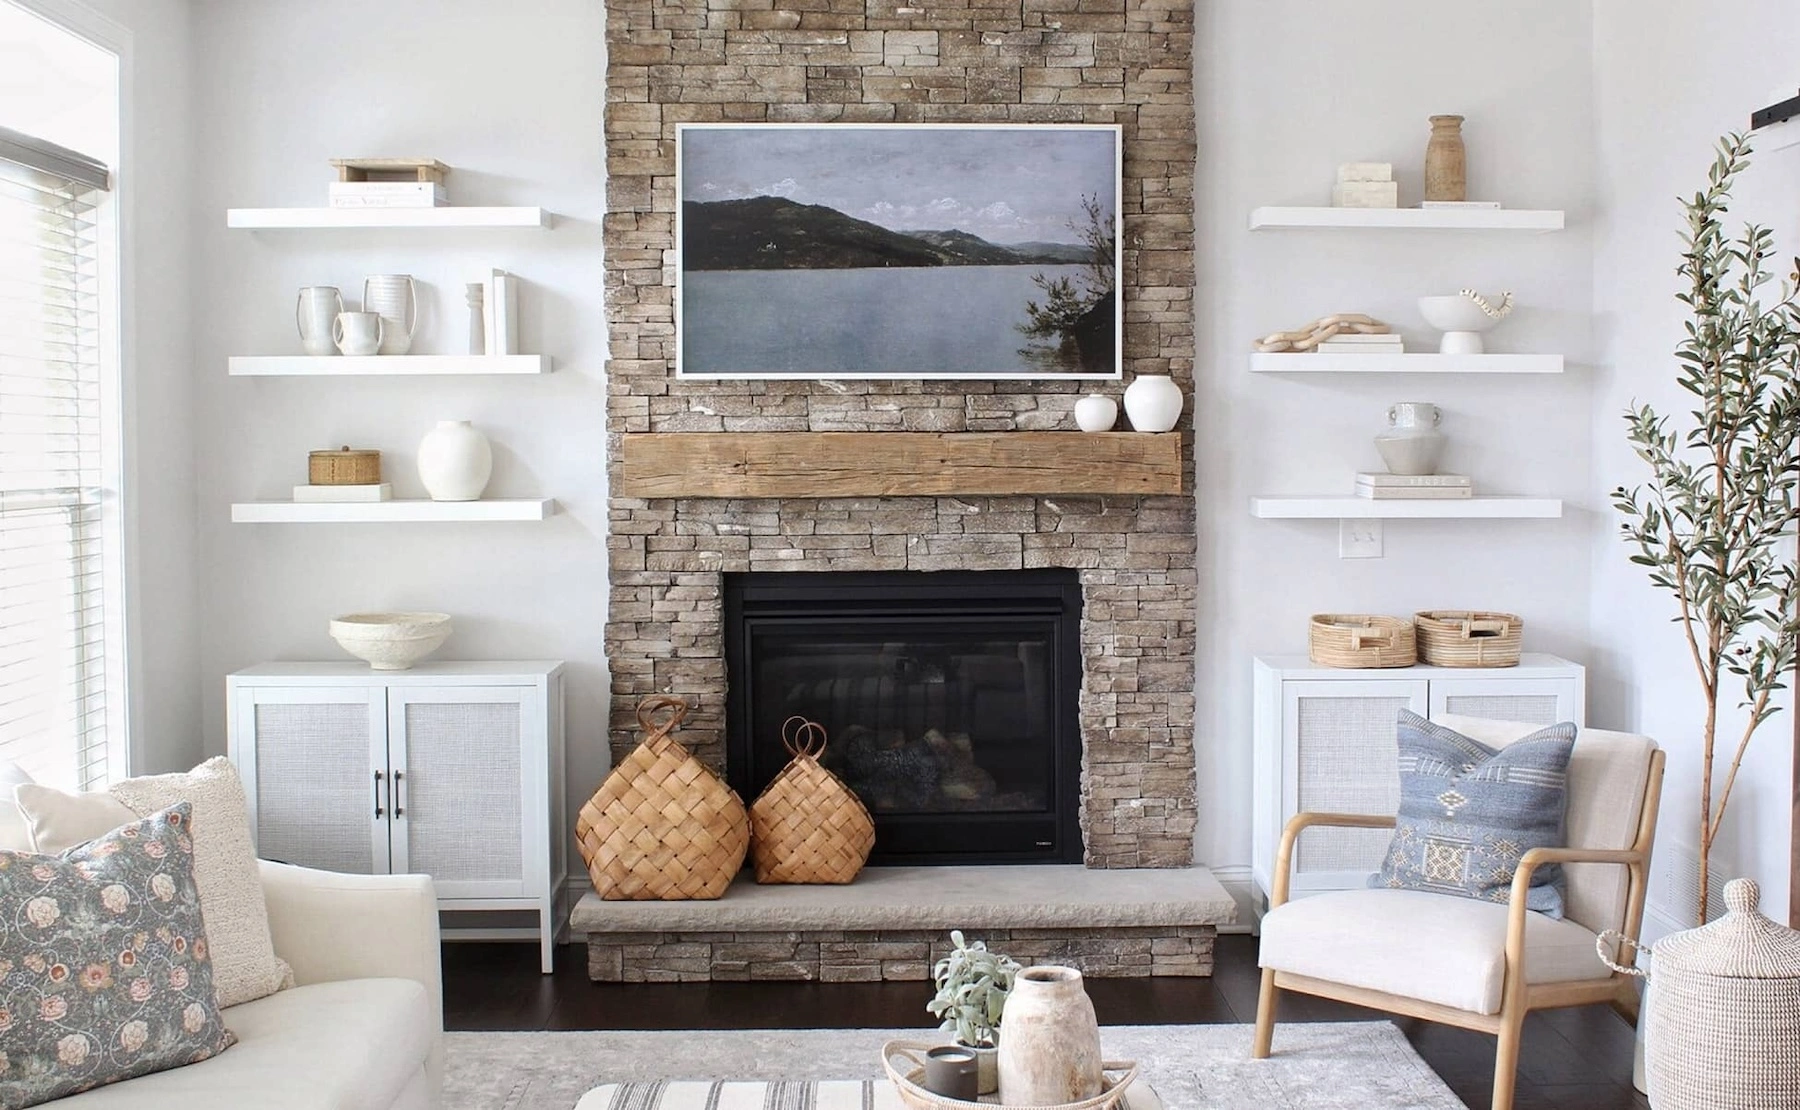 Tan and gray bricks around a minimalistic fireplace in a white living room.